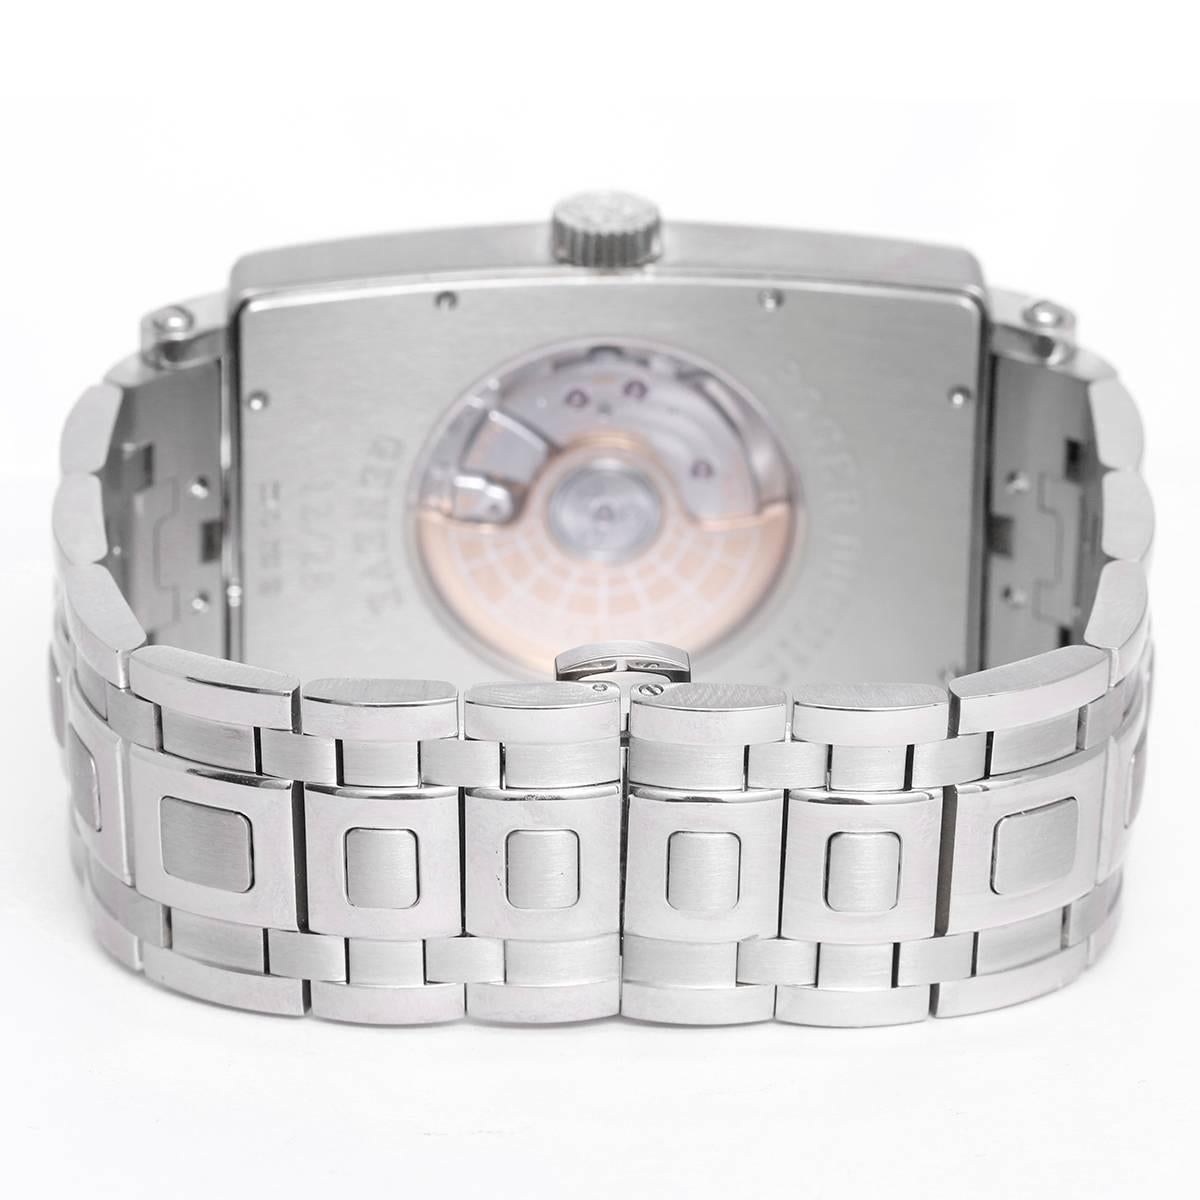 Roger Dubuis Much More 18k White Gold Men's Limited Edition Watch -  Automatic winding. 18k white gold case (34mm x 46mm). Bracelet will fit 7¼ wrist. Silvered dial with Roman numerals. Roger Dubuis 18k white gold bracelet. Pre-owned with box and